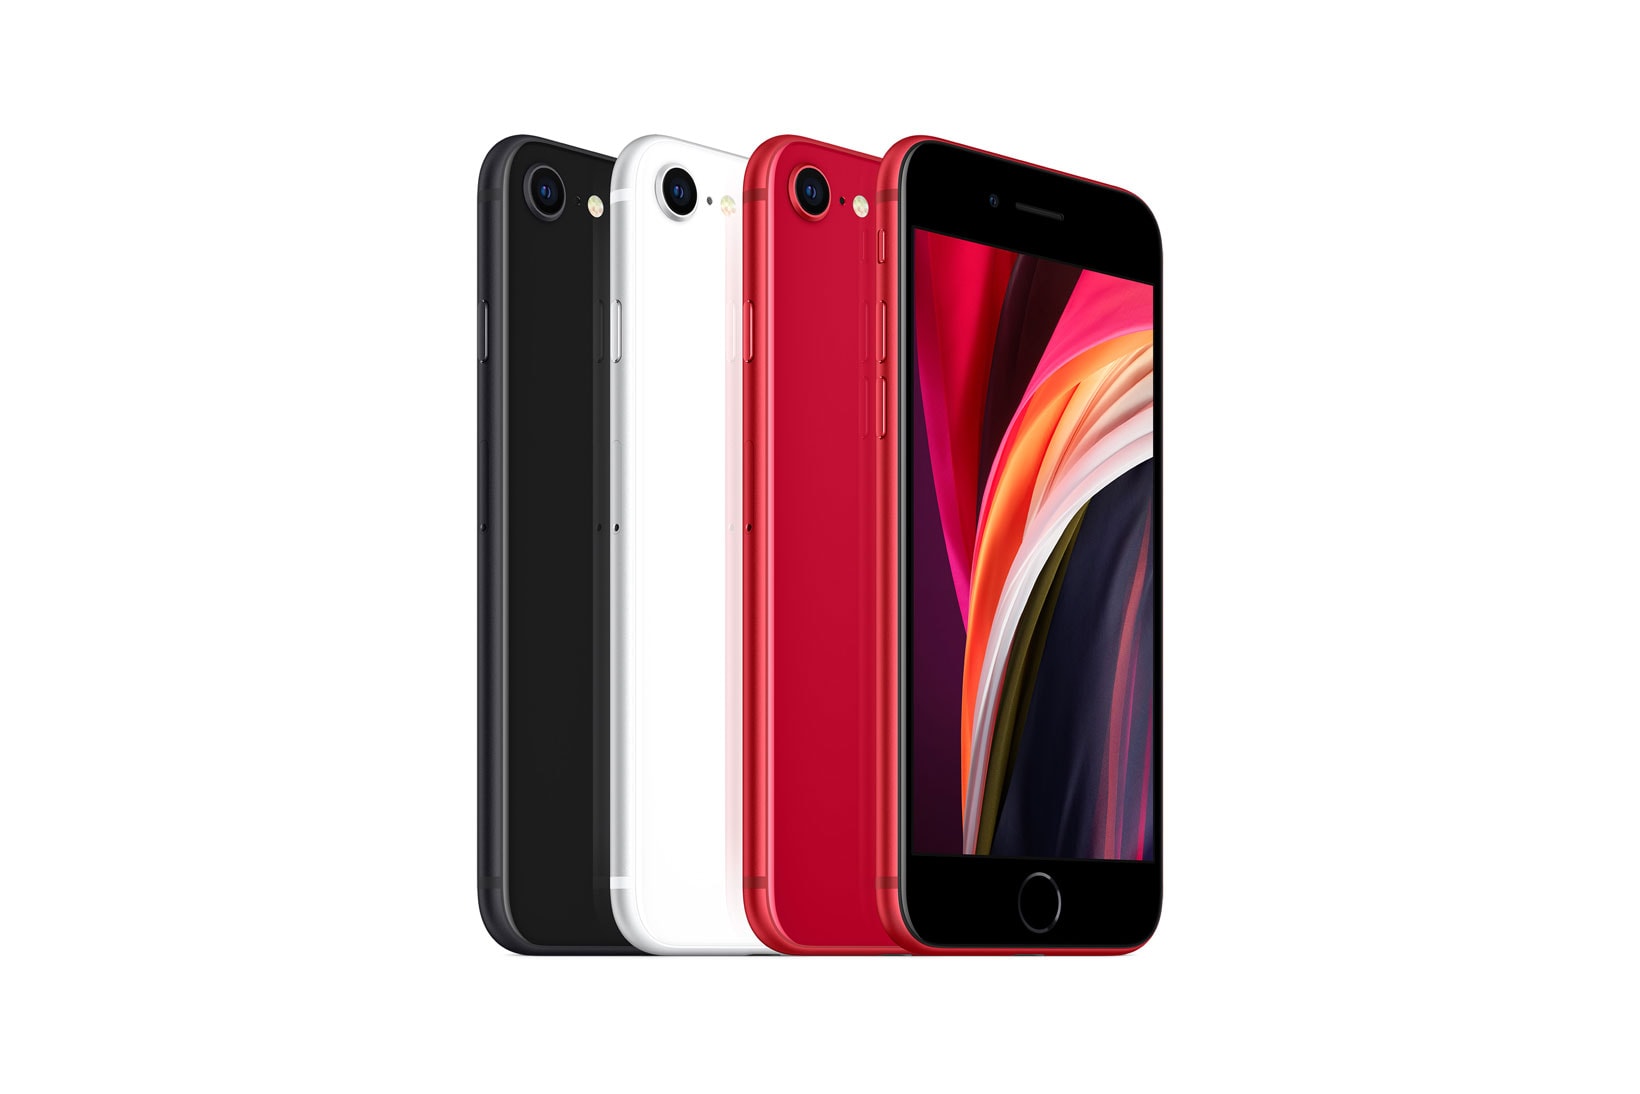 Apple iPhone SE 2020 Red Black White Colors